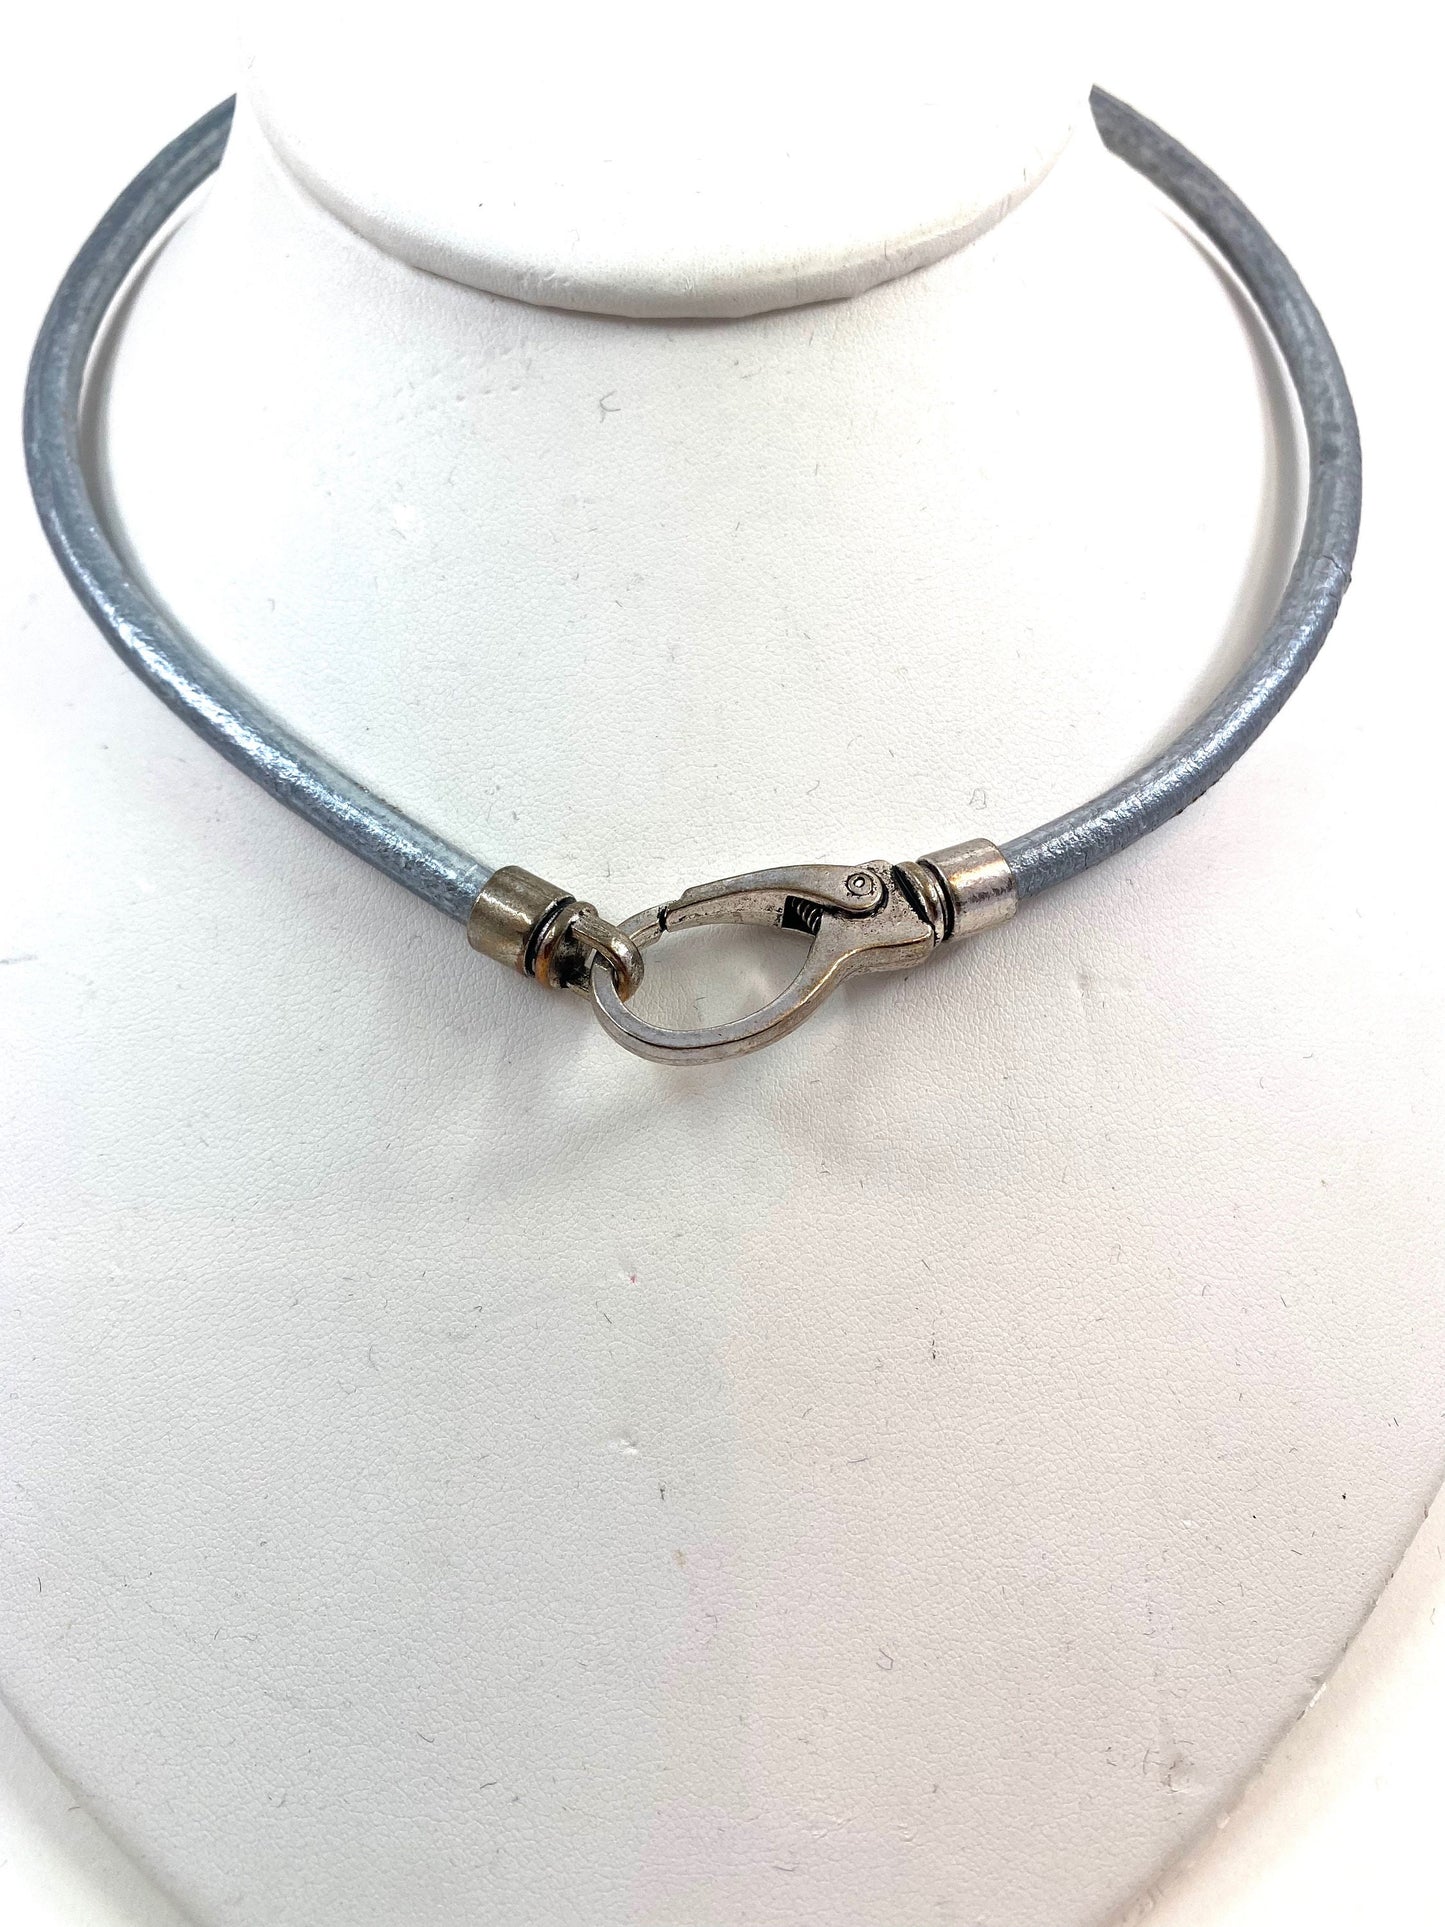 Leather Necklace. Silver-gray Italian leather choker necklace fashioned with a center silver large lobster and loop clasp. Leather is soft.